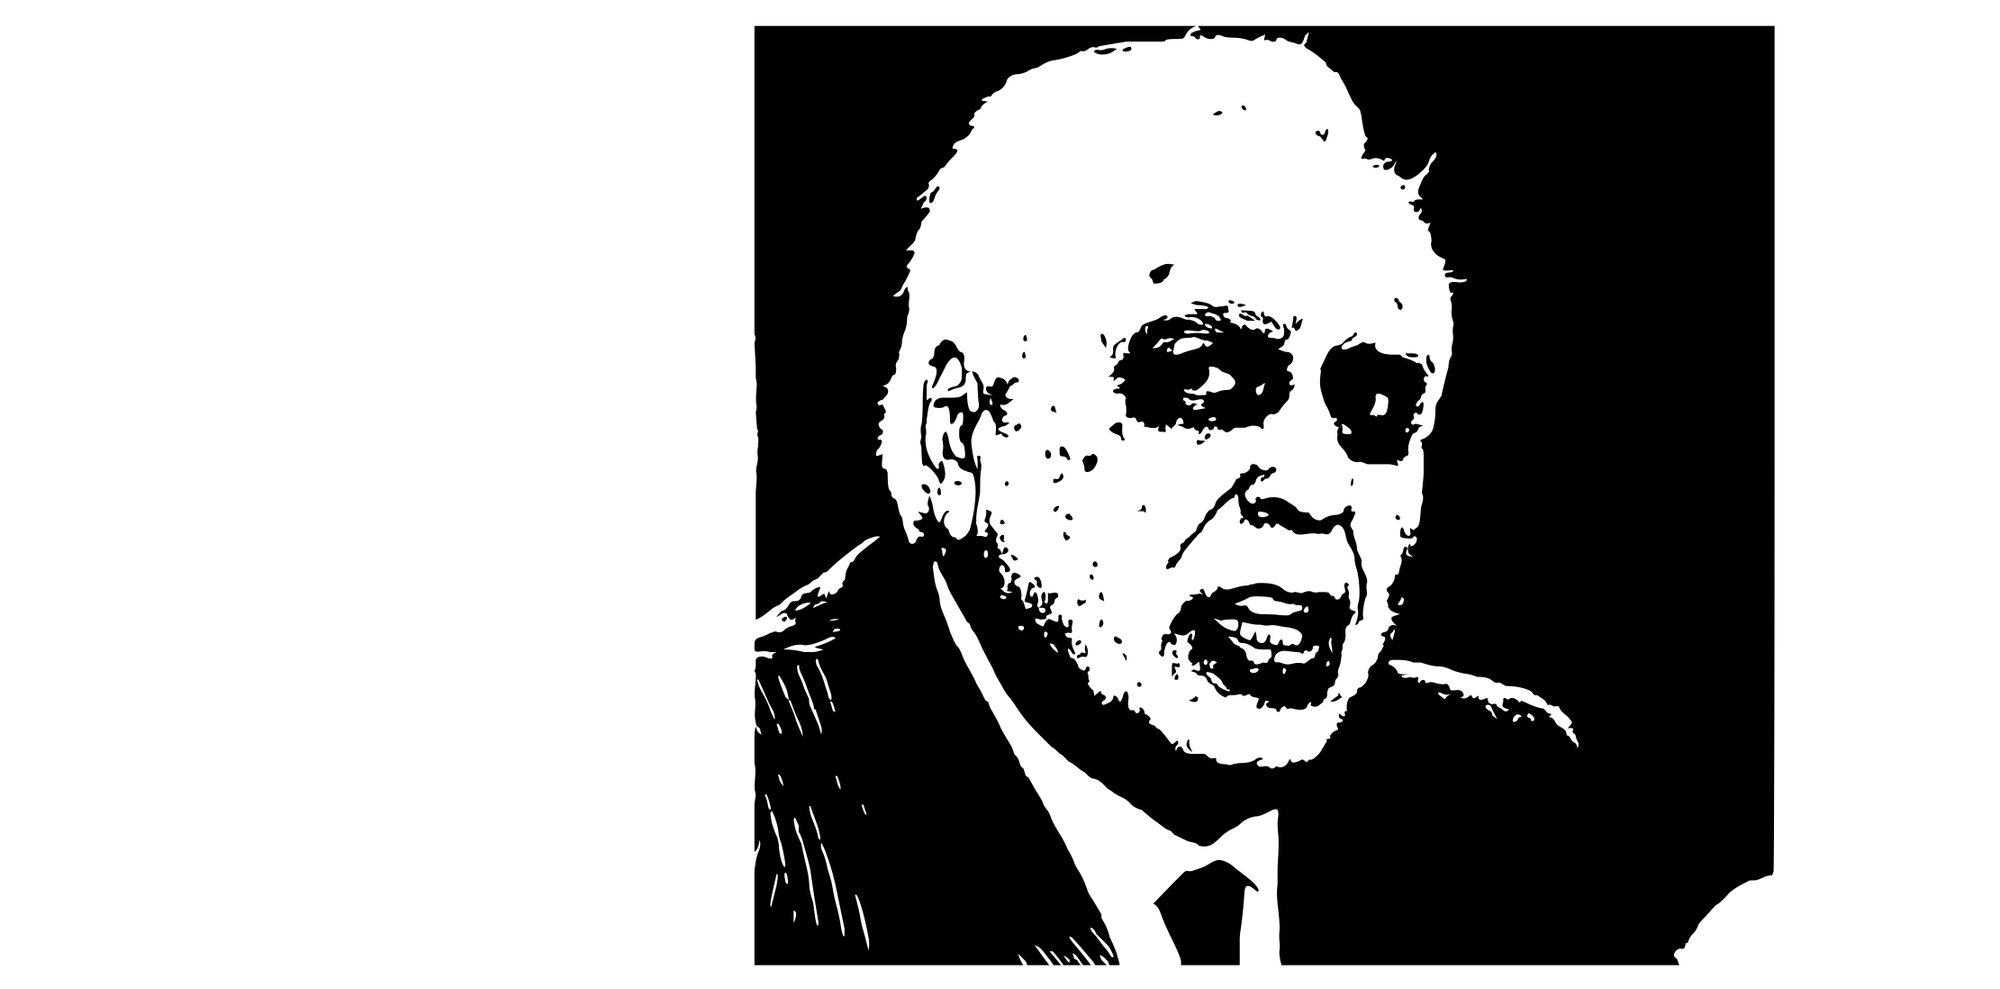 Kapil Sibal – under whom people charged under Sedition for an Exam Paper Question, Now wants the law abolished for the Tukde gang!